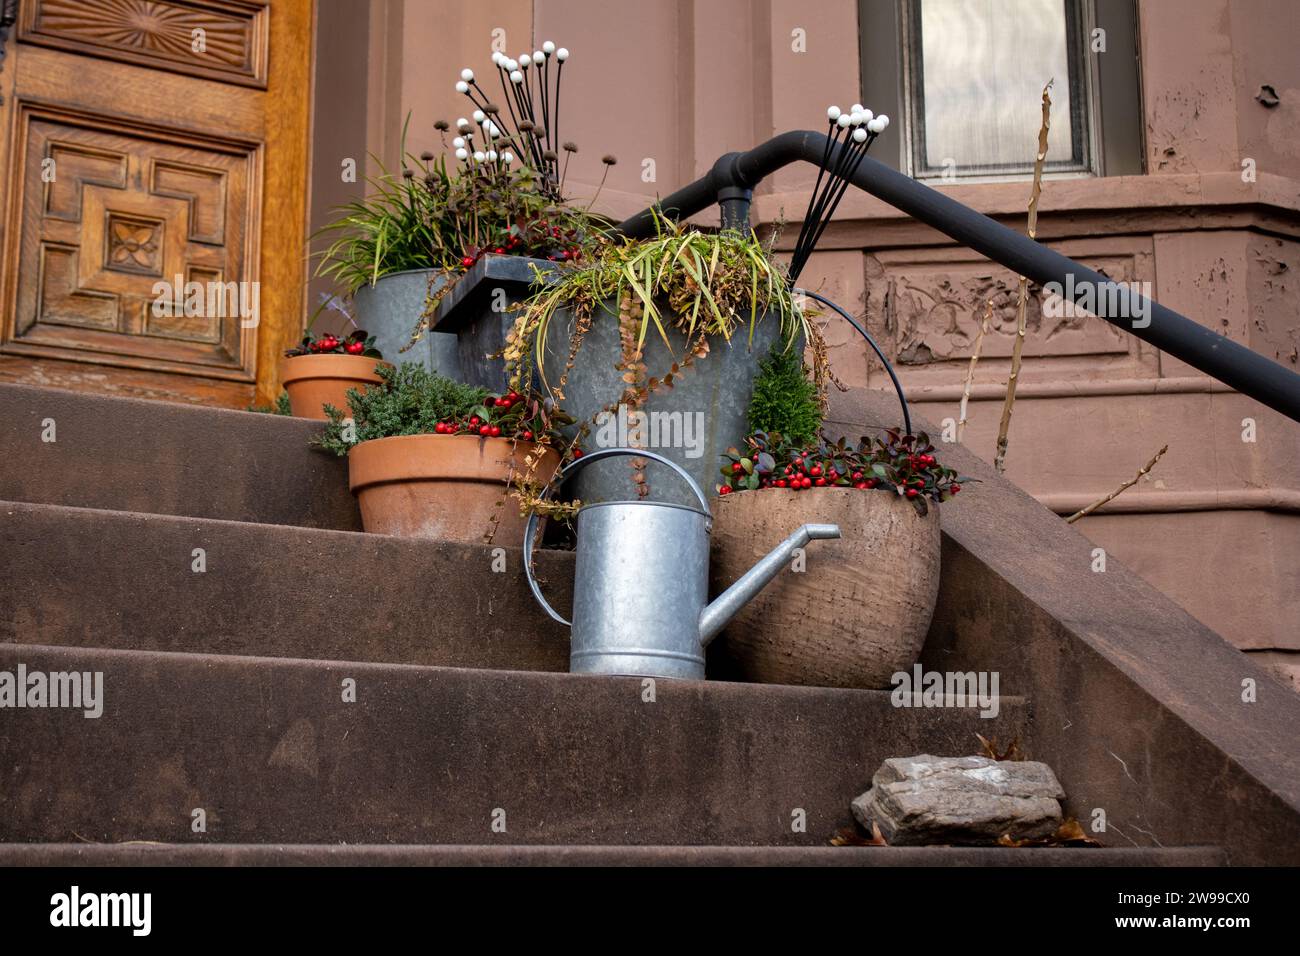 A close-up of a potted plant on a set of stairs in Brooklyn, New York Stock Photo